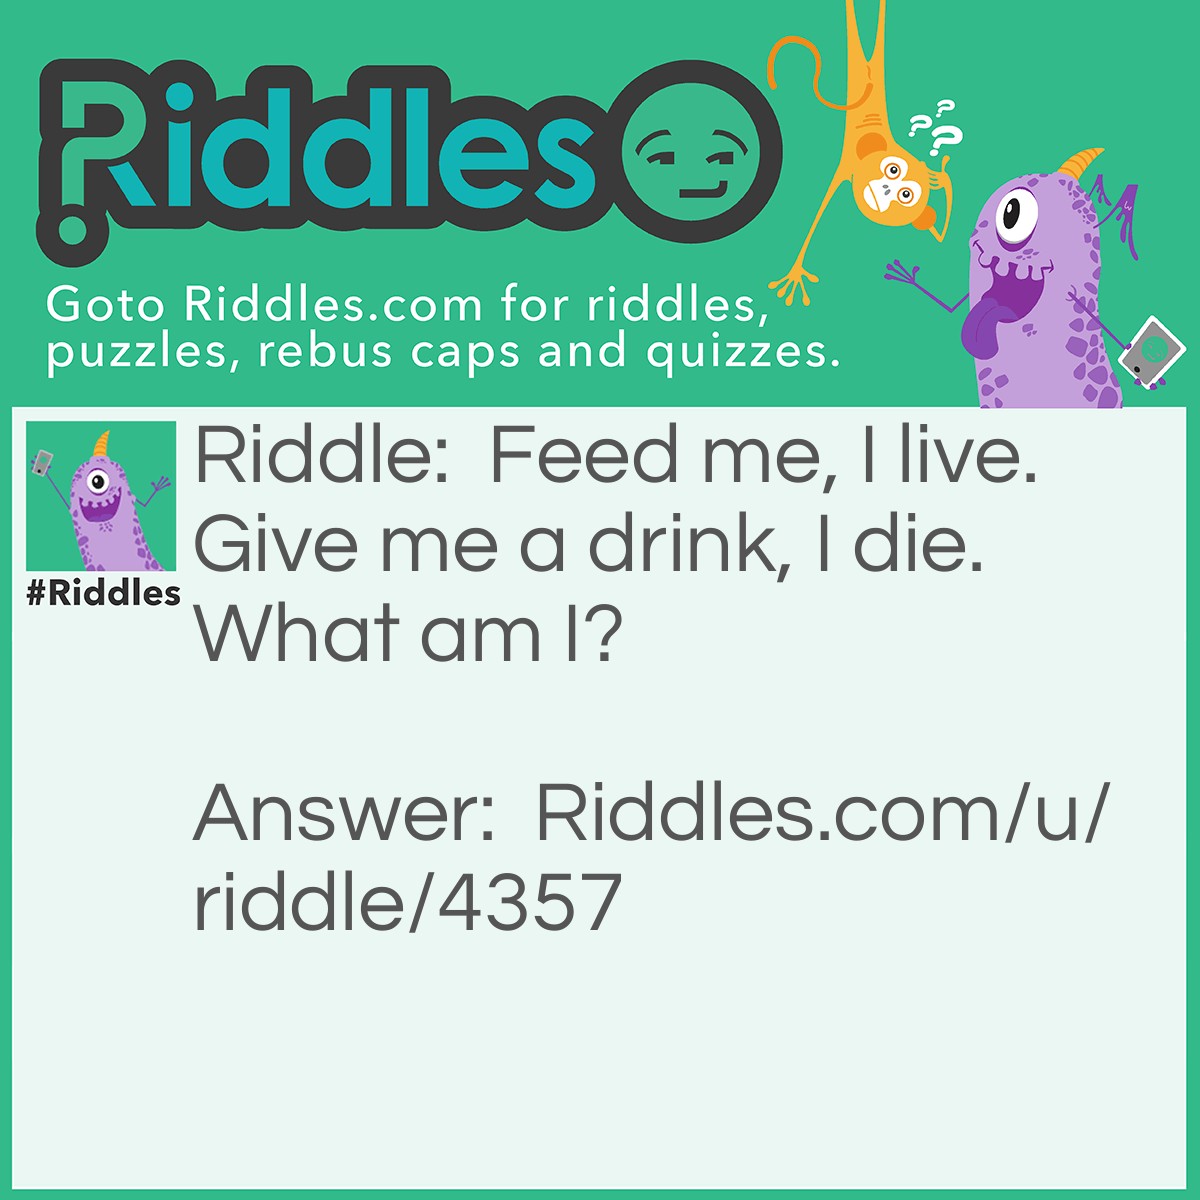 Riddle: Feed me, I live. Give me a drink, I die. What am I? Answer: Fire.